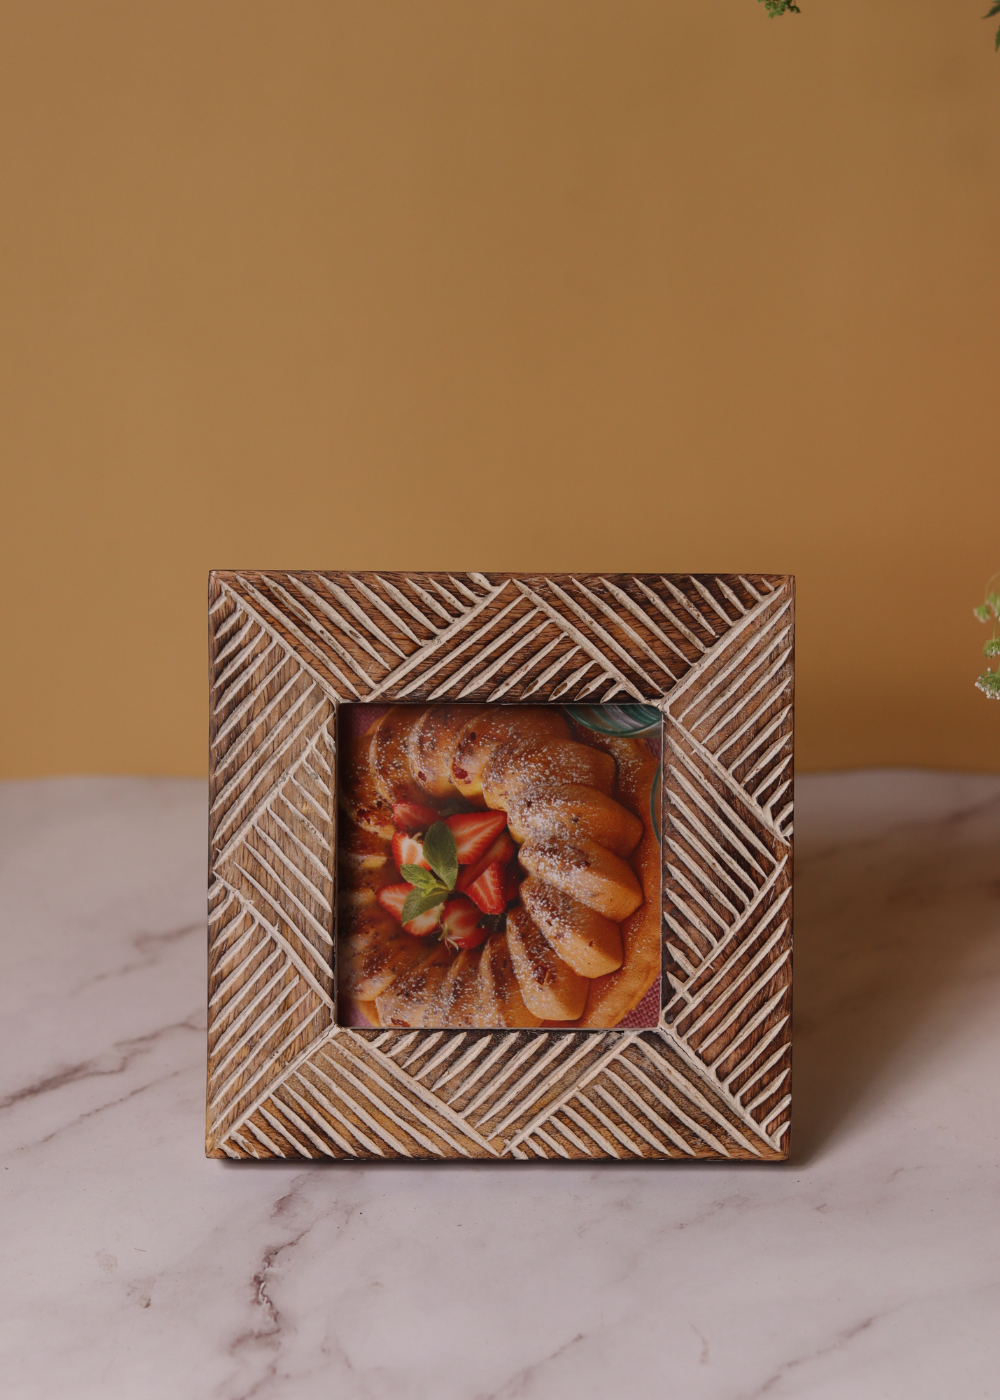 photo frame made by wood